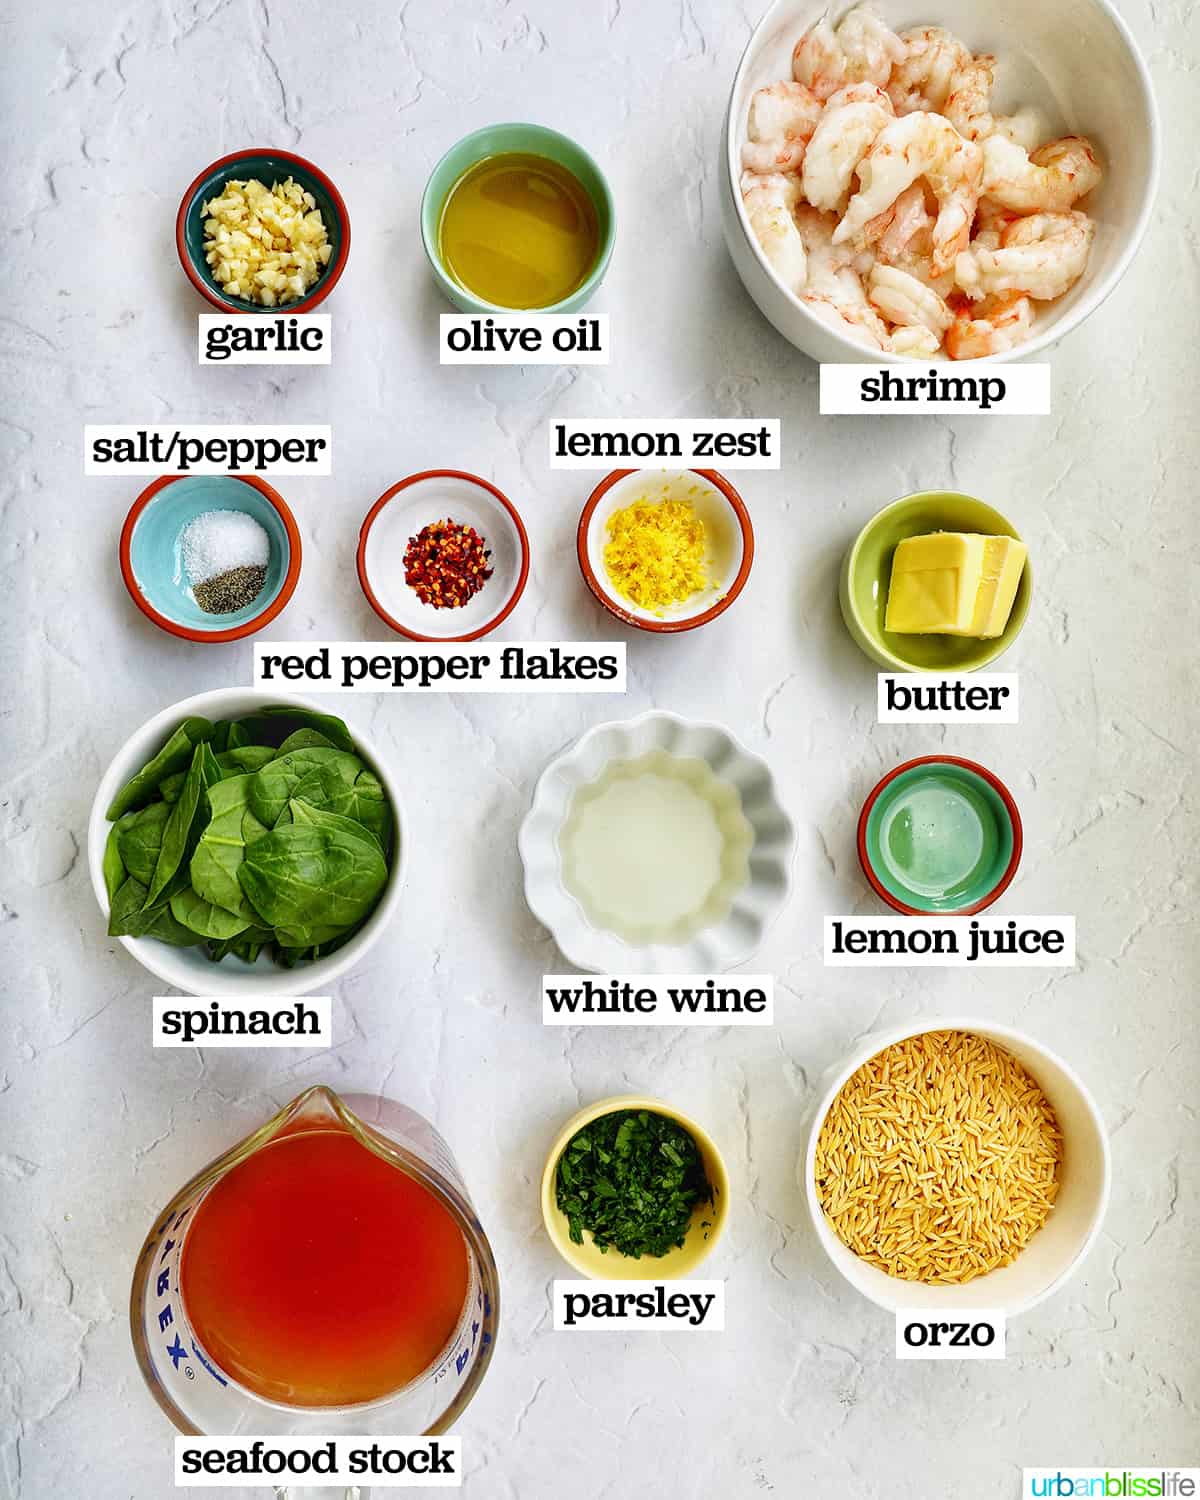 ingredients to make shrimp scampi with orzo.